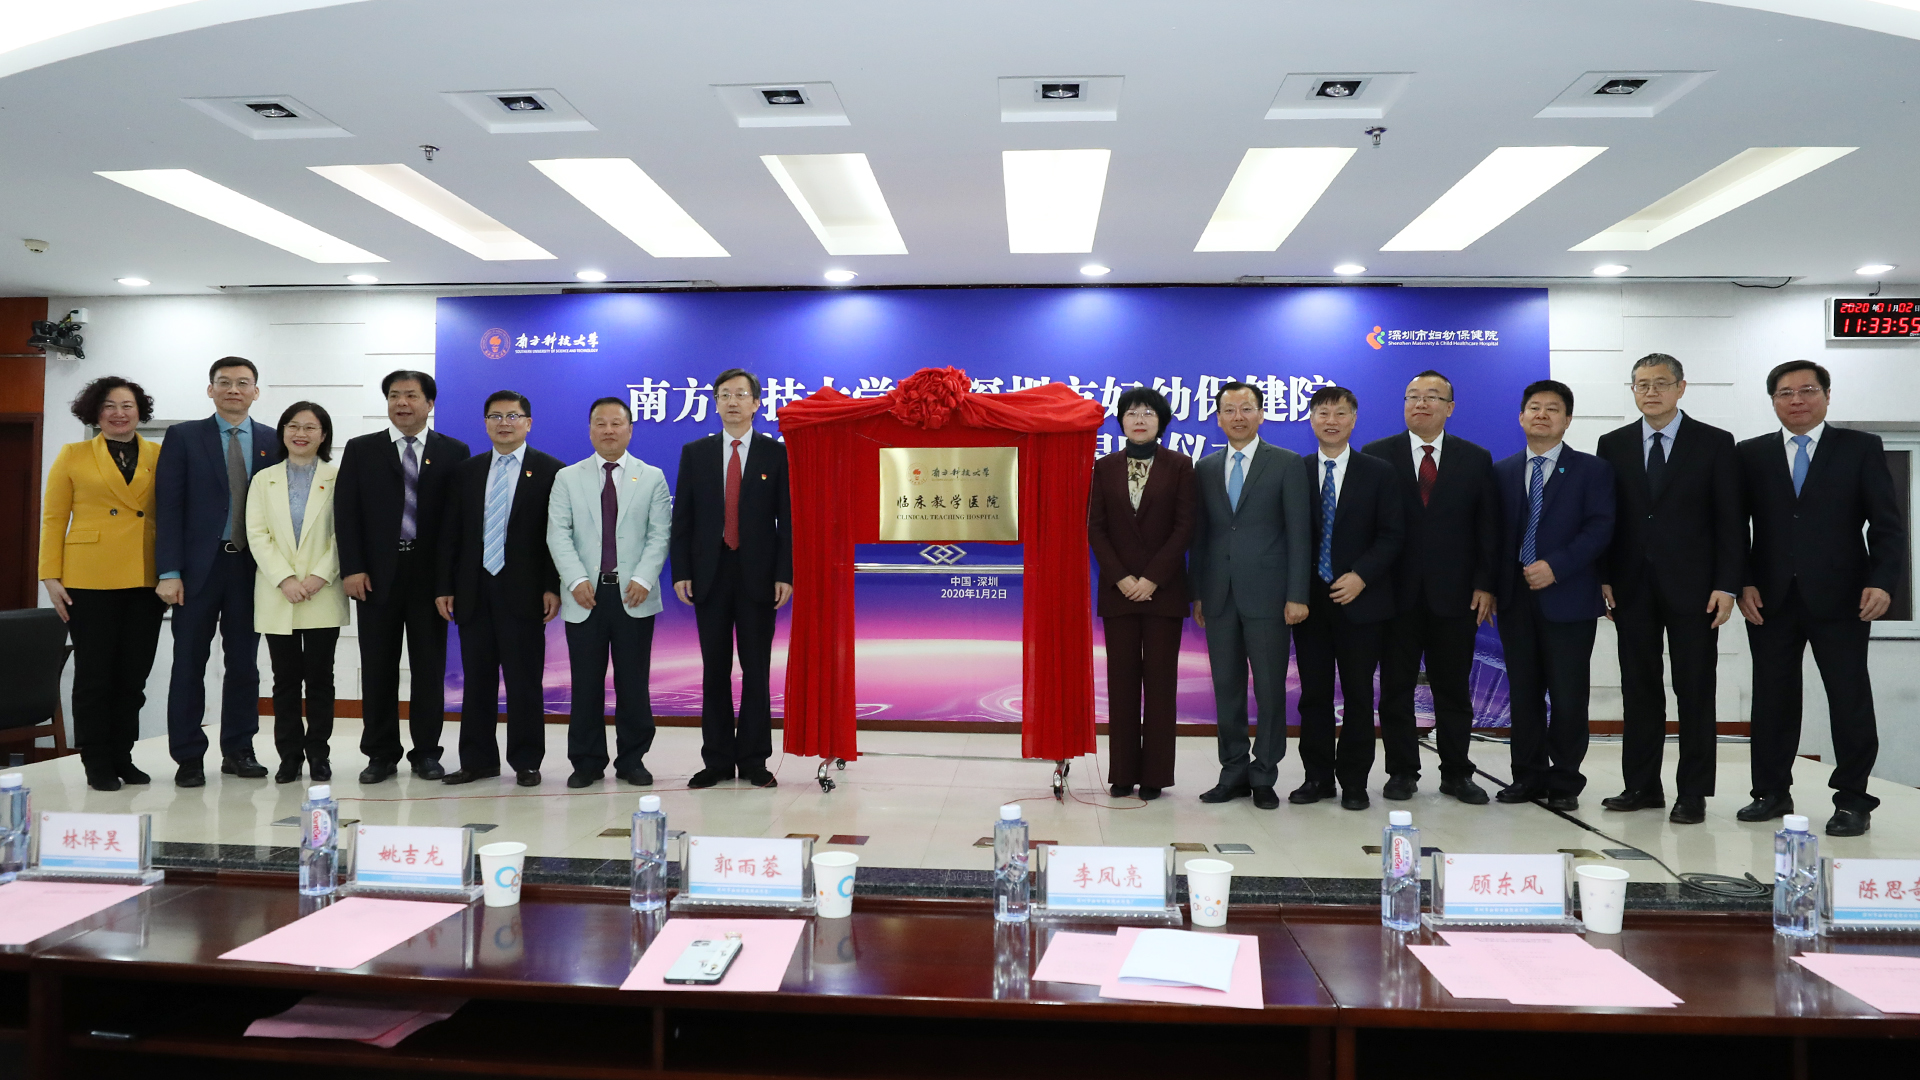 SUSTech to build a clinical teaching hospital with Shenzhen Maternity & Child Healthcare Hospital